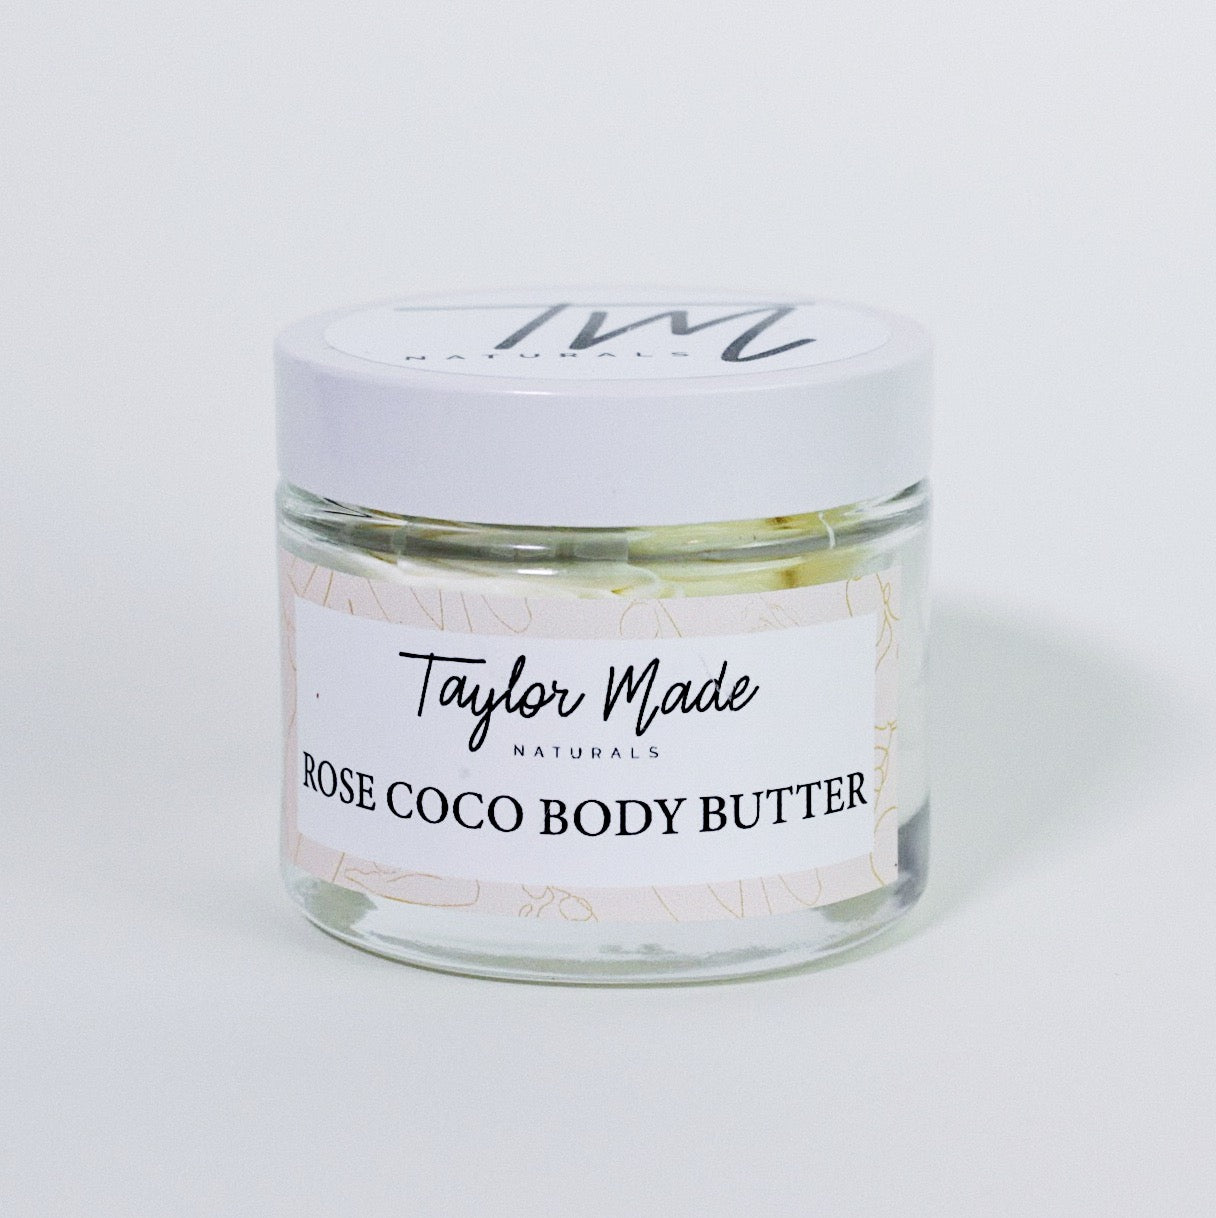 Rose Coco Body Butter